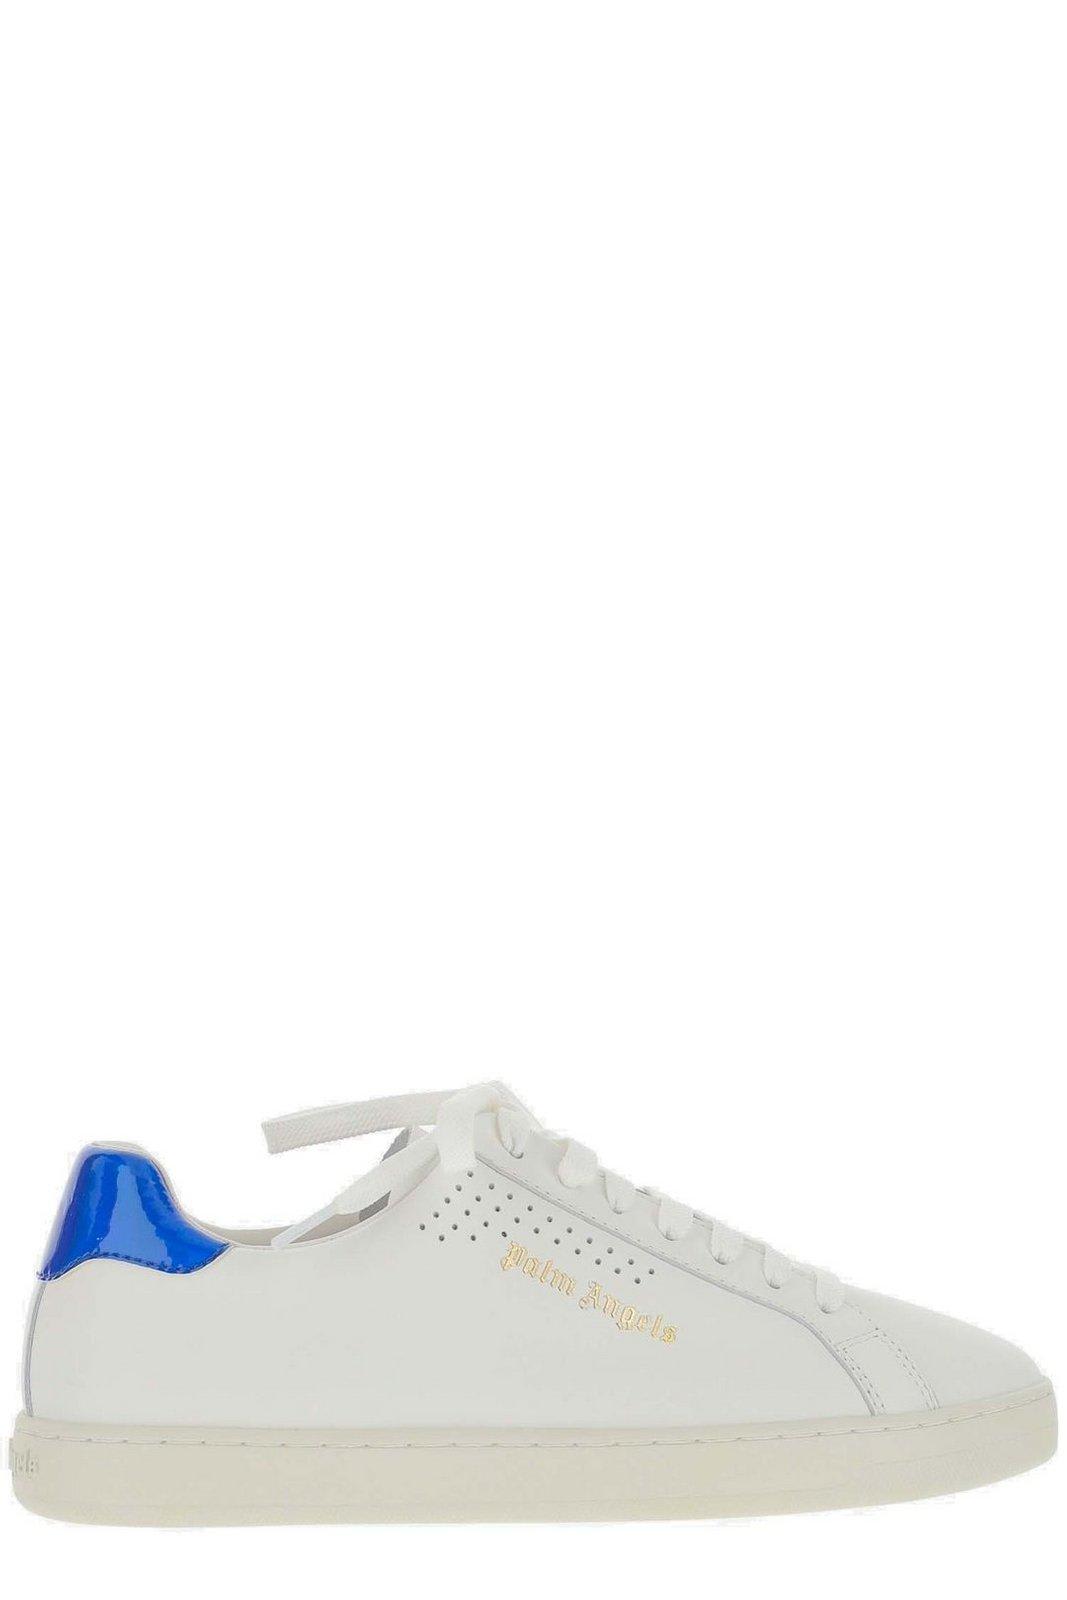 Palm Angels Palm One Lace-up Sneakers